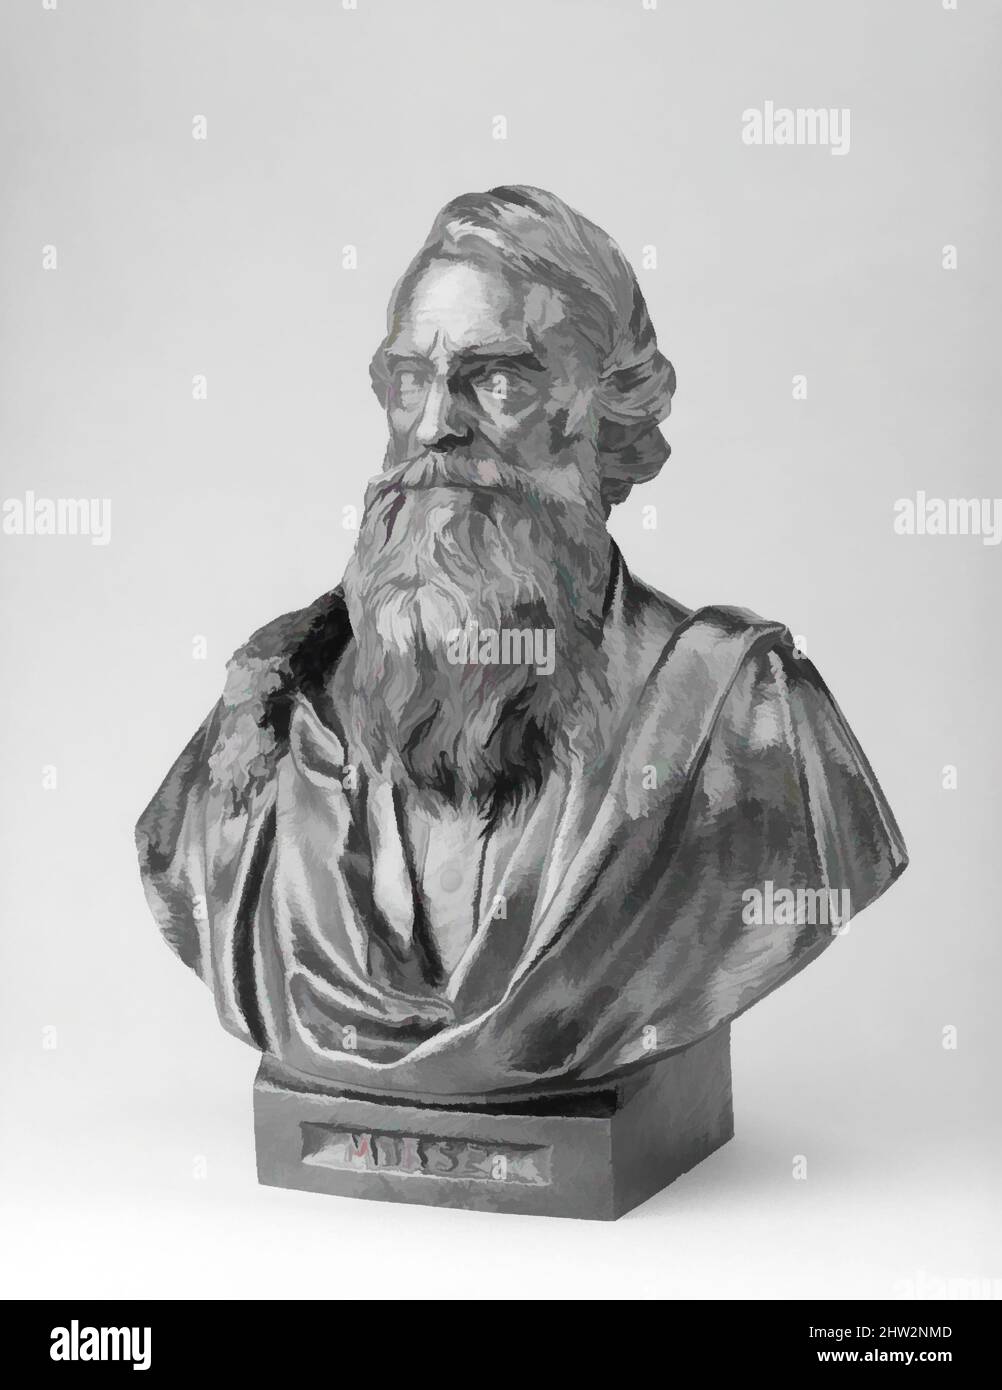 Art inspired by Samuel F. B. Morse, ca. 1870, Bronze, 15 1/2 x 12 3/4 x 9 3/8 in. (39.4 x 32.4 x 23.8 cm), Sculpture, Byron M. Pickett (ca. 1834–1907), Pickett's bust-length portrait of Morse is related to his over-lifesize bronze statue of the artist-inventor, dedicated in 1871 in, Classic works modernized by Artotop with a splash of modernity. Shapes, color and value, eye-catching visual impact on art. Emotions through freedom of artworks in a contemporary way. A timeless message pursuing a wildly creative new direction. Artists turning to the digital medium and creating the Artotop NFT Stock Photo